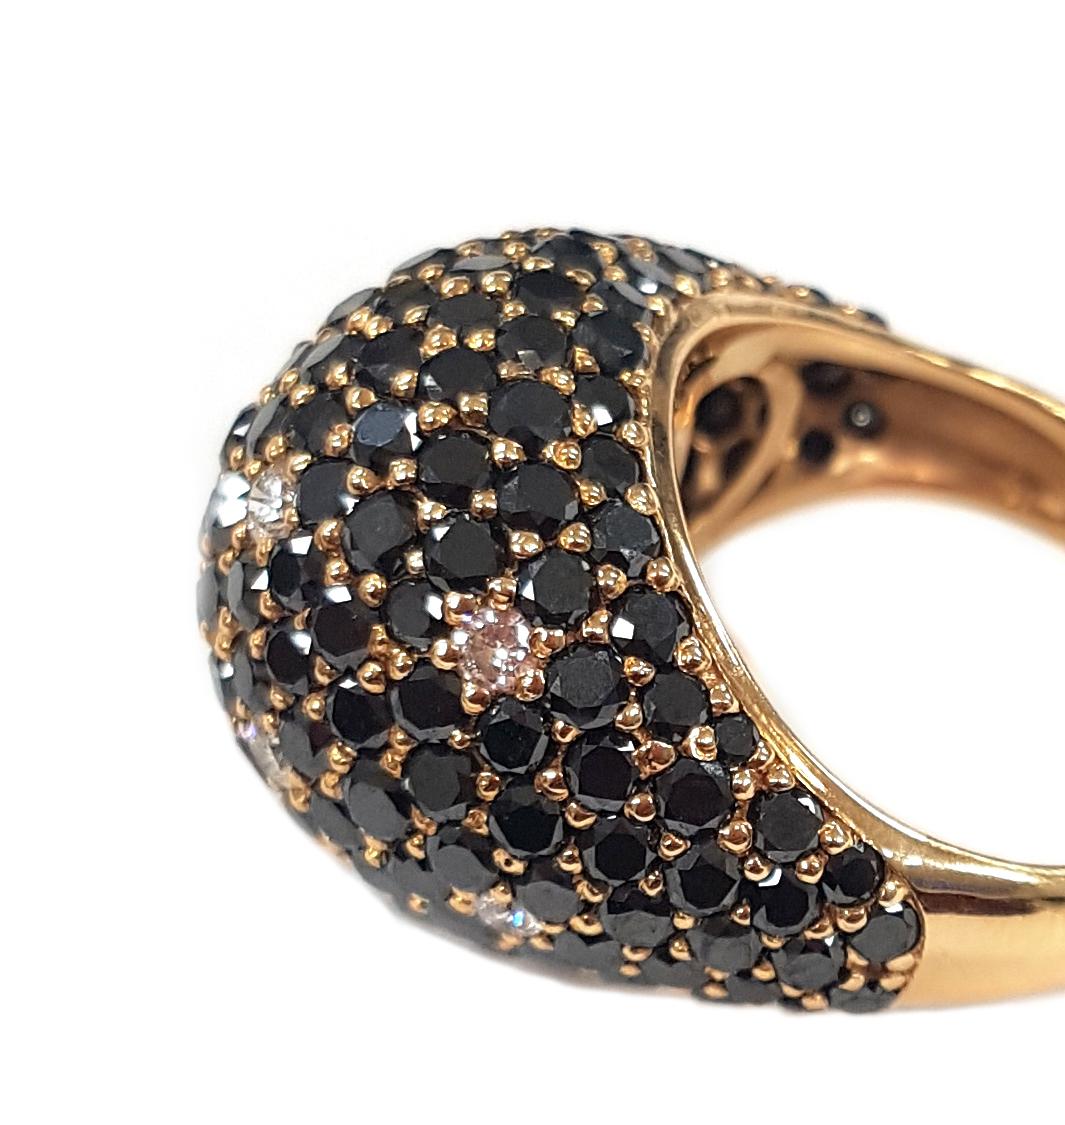 This sleek, Art Deco-inspired cocktail ring has been masterfully created entirely by hand from 18-karat rose gold and 200+ round black diamonds totalling 7.78 carats. Set throughout the black diamonds, 8 white diamonds glitter like stars in the